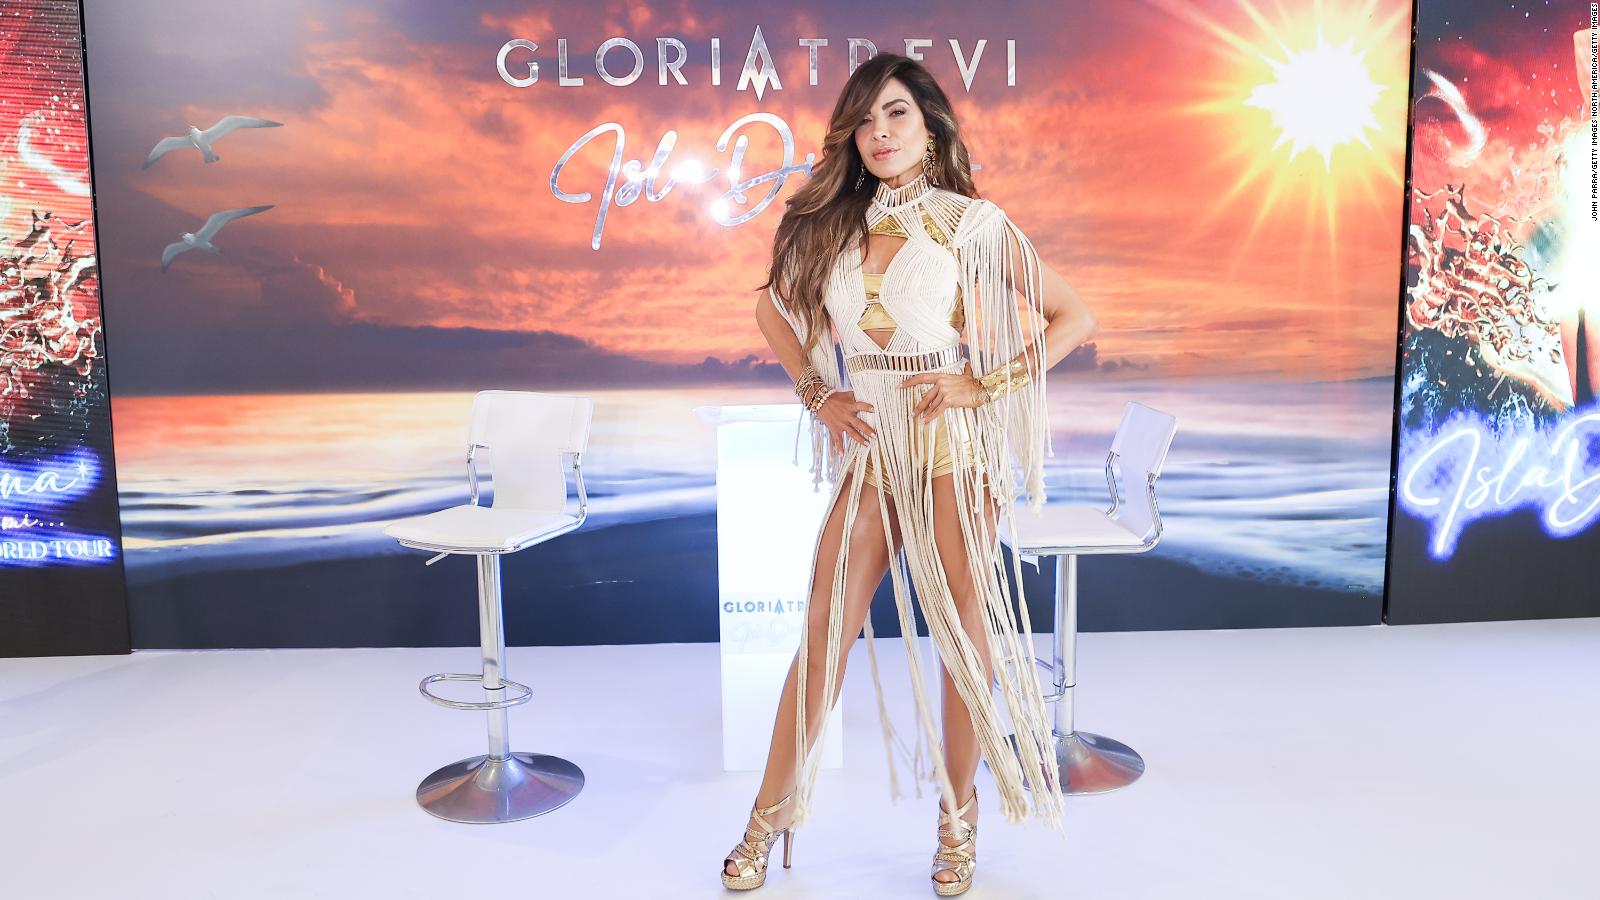 Gloria Trevi announces her new tour in the United States Video The